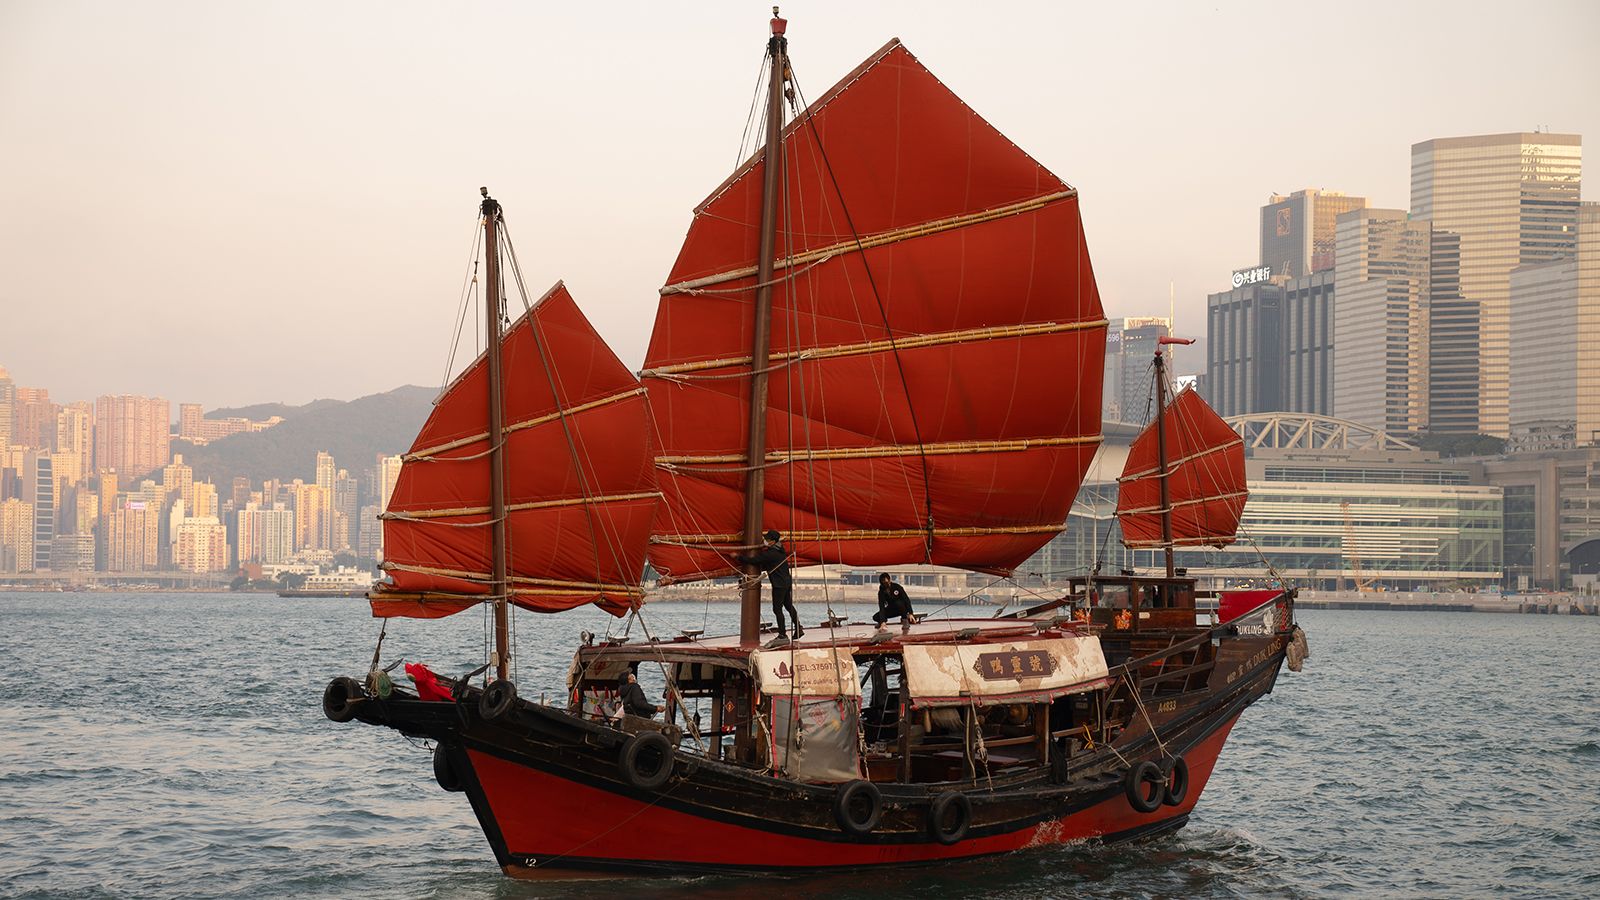 chinese junk boat plans